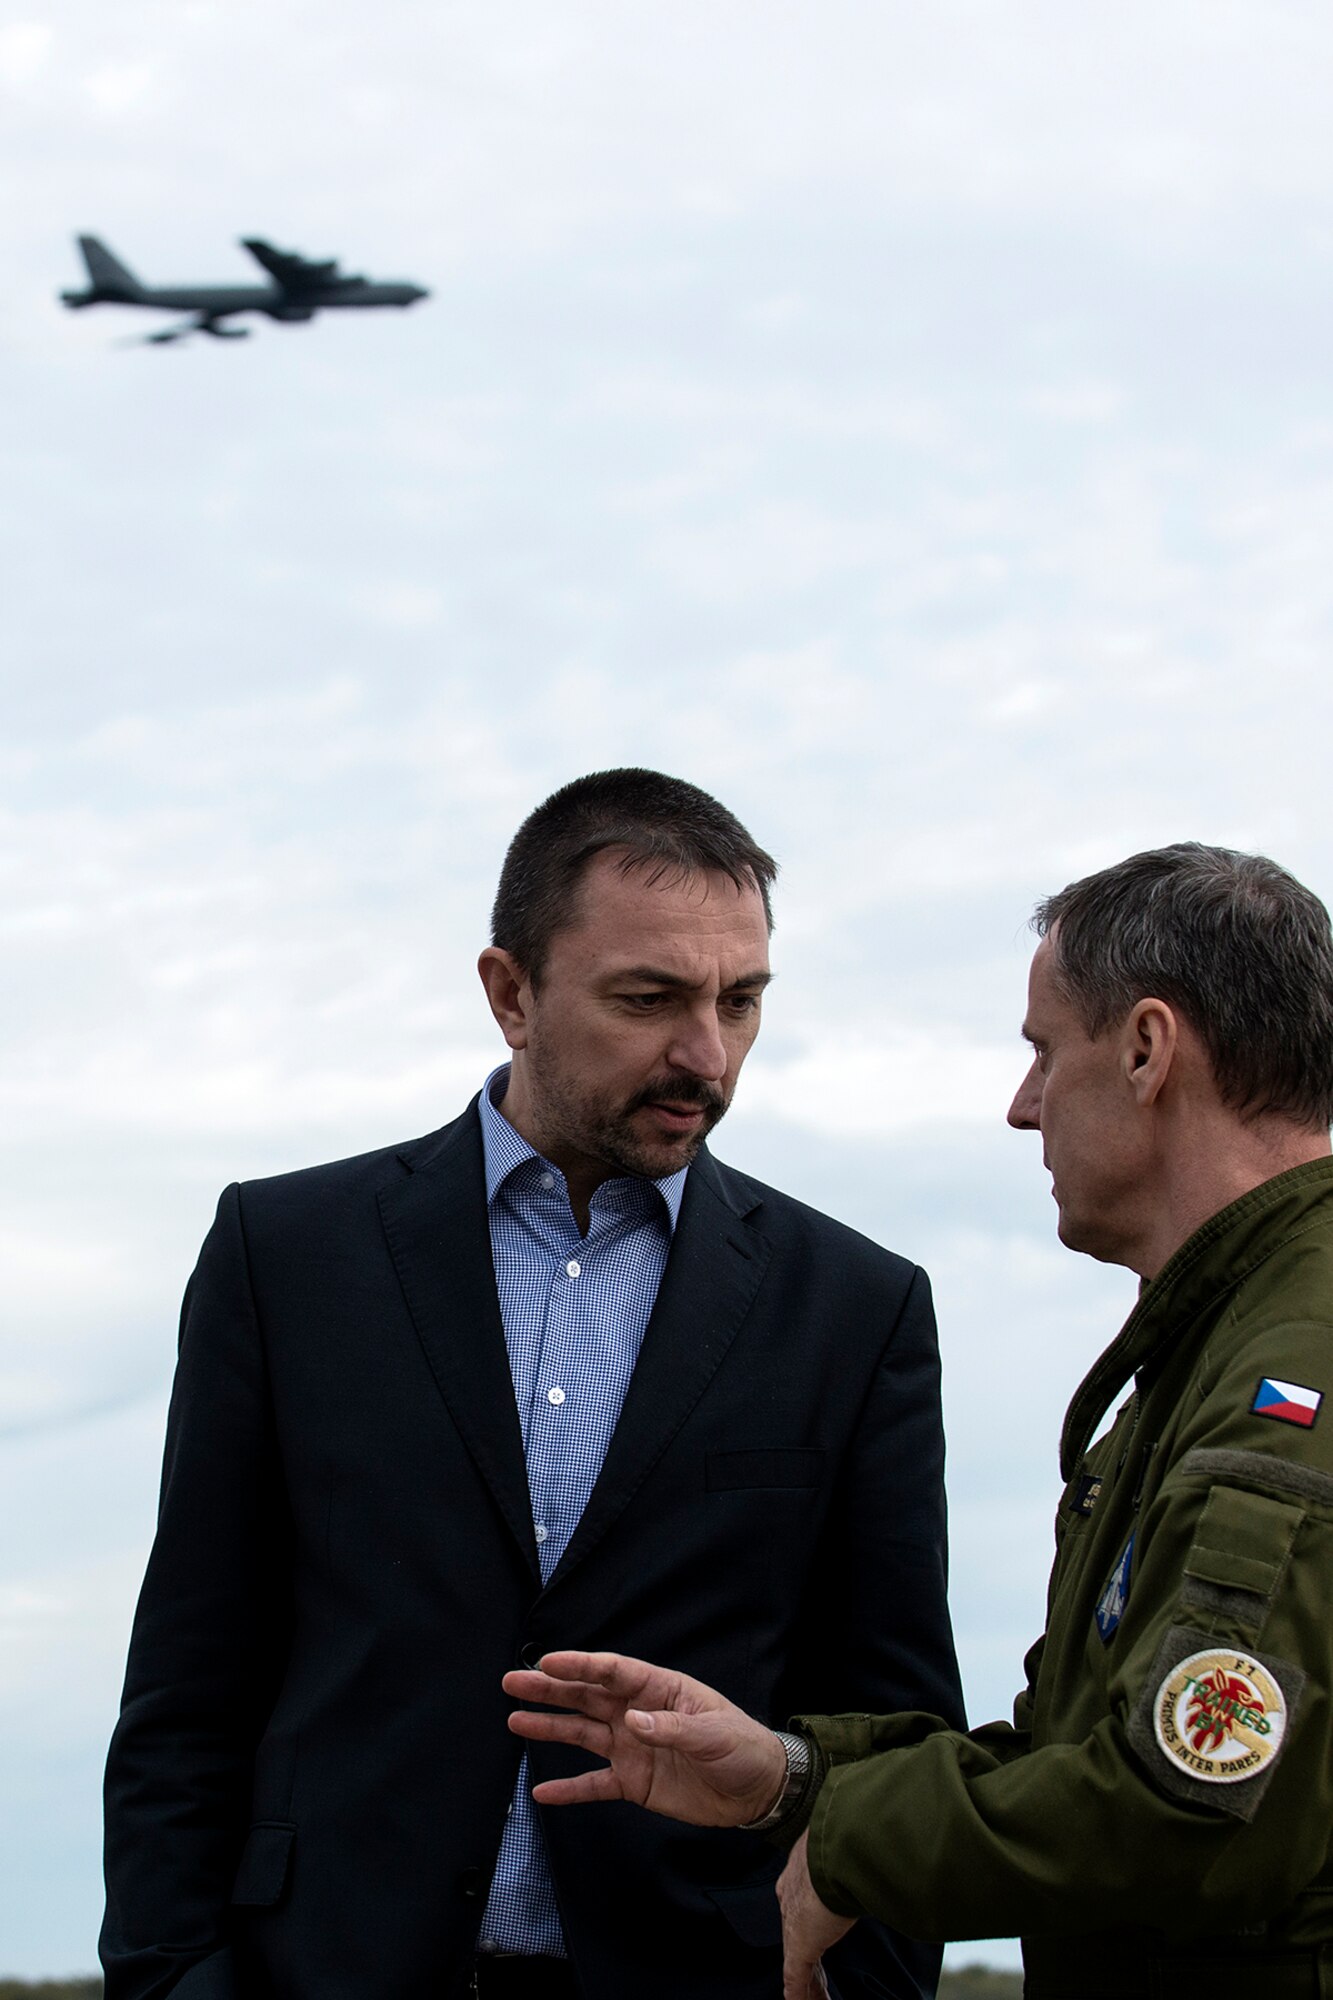 Zbynek Pavlacik (left), Chairman and Co-Founder of Jagello 2000, talks with Brig. Gen. Jiri Verner, the Defense Attaché of the Czech Republic in the United States, during their visit to Barksdale Air Force Base, La., Nov. 8, 2013. The Jagello 2000 is the top Czech non-profit organization focused on the activities in the field of public diplomacy and on support and presentation of NATO and security politics. (U.S. Air Force photo by Master Sgt. Greg Steele/Released)